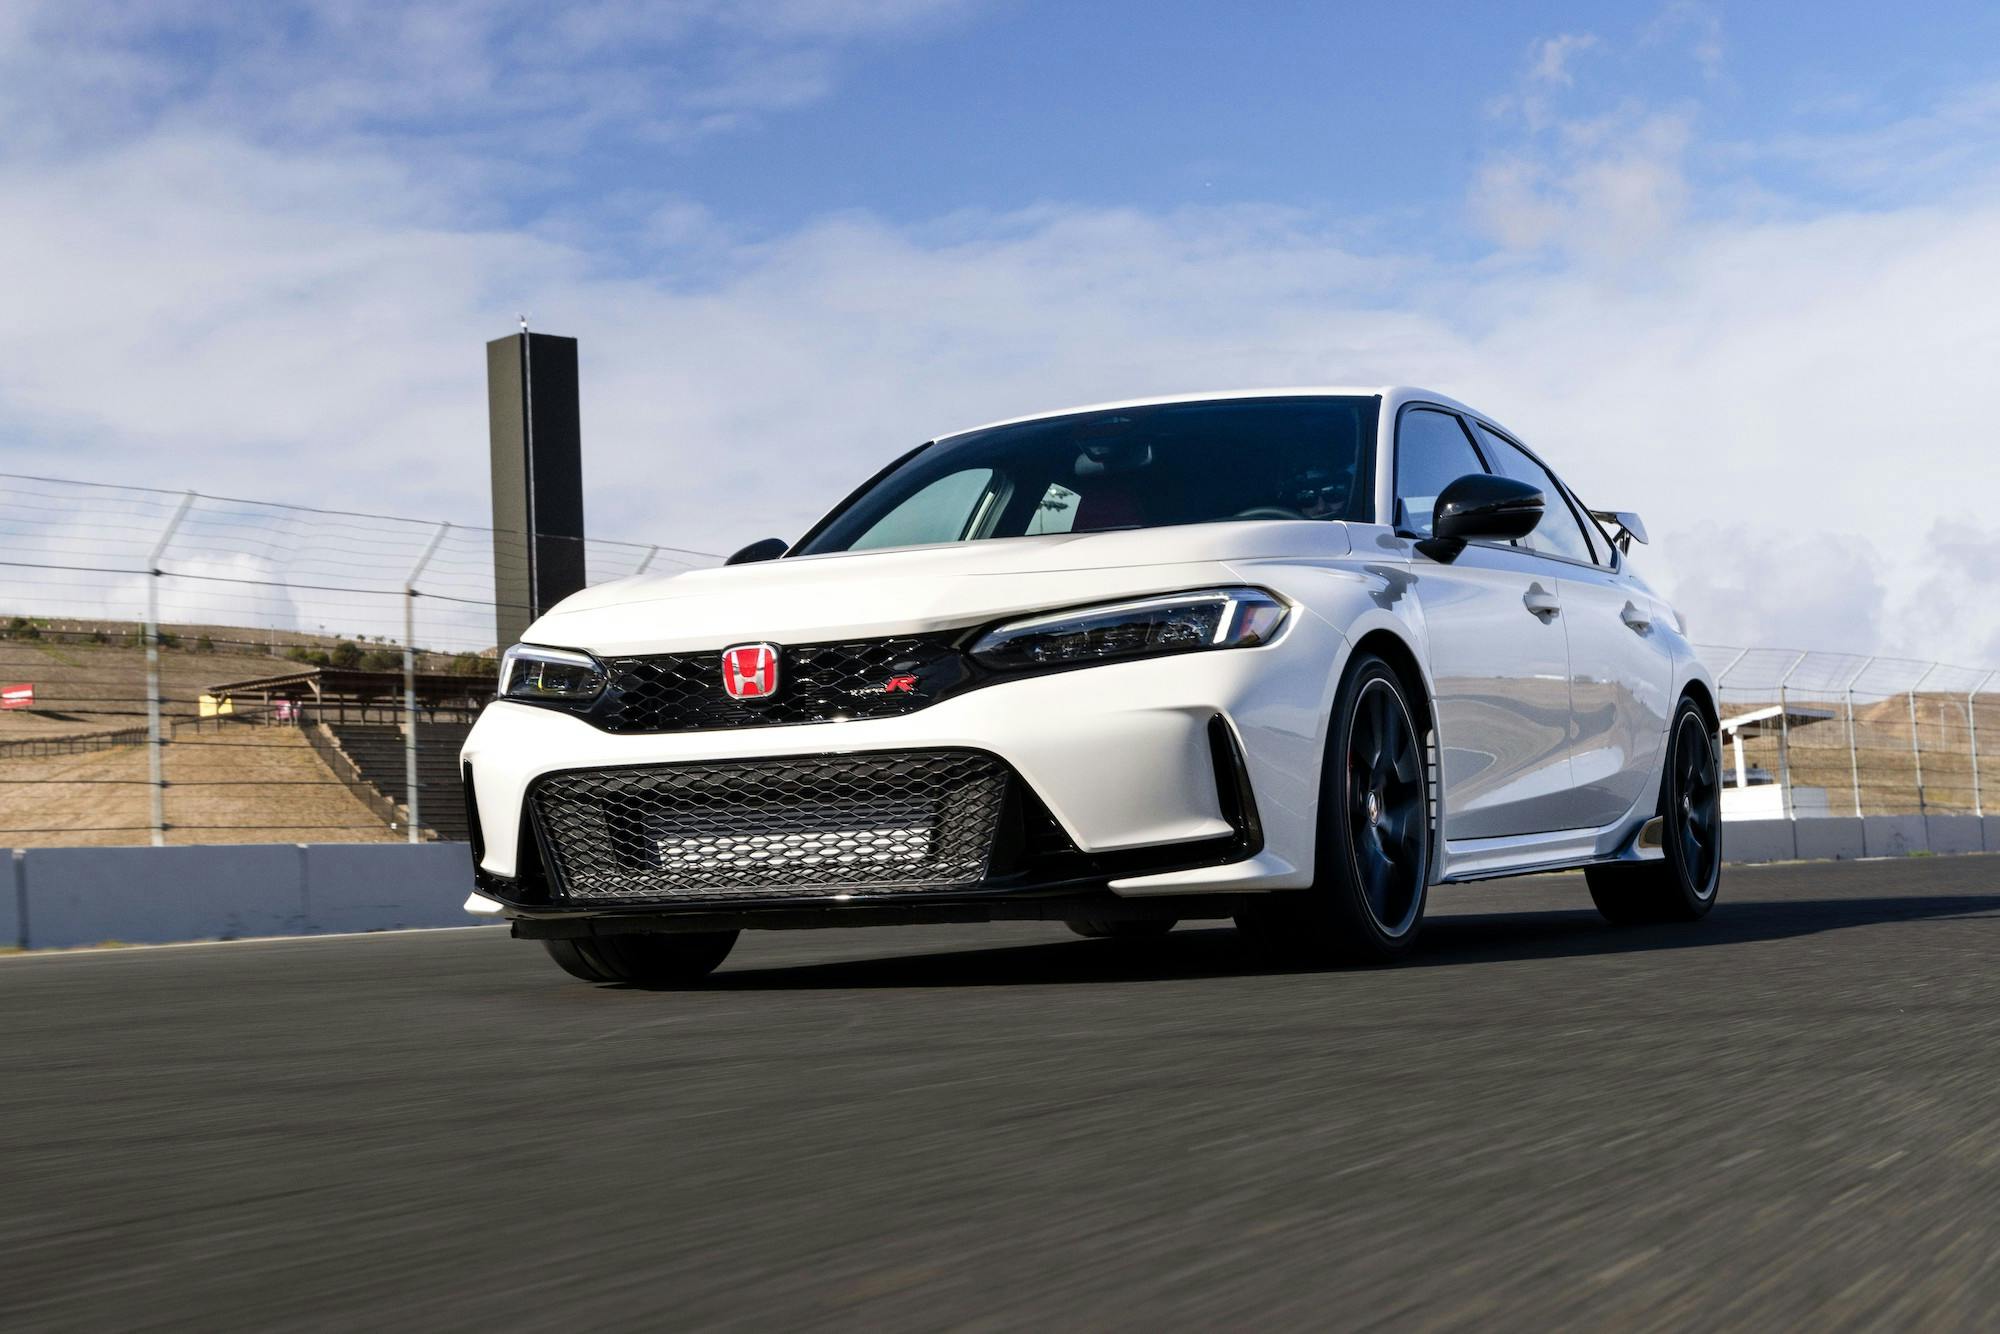 2001 Acura Integra Type R and 2021 Honda Civic Type R: Did the Golden Era  ever end? - CNET